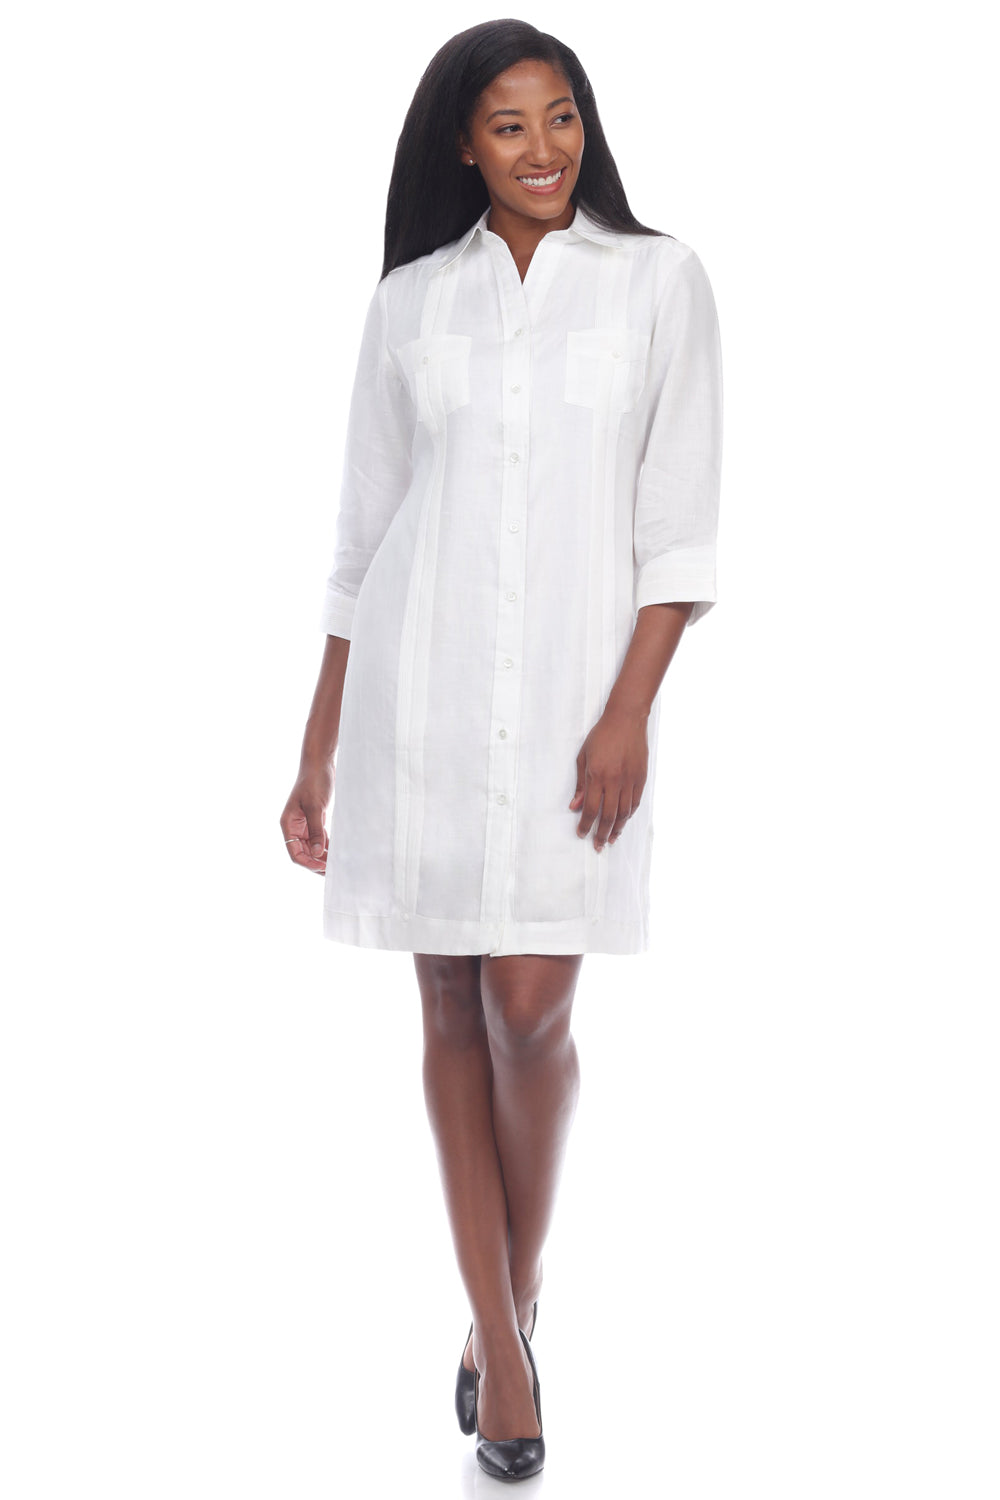 4 Sleeve and Button Down - Mojito Collection - Guayabera Dress, Long Sleeve Shirt Dress, Mojito Guayabera, Womens Guayabera Shirt Dress